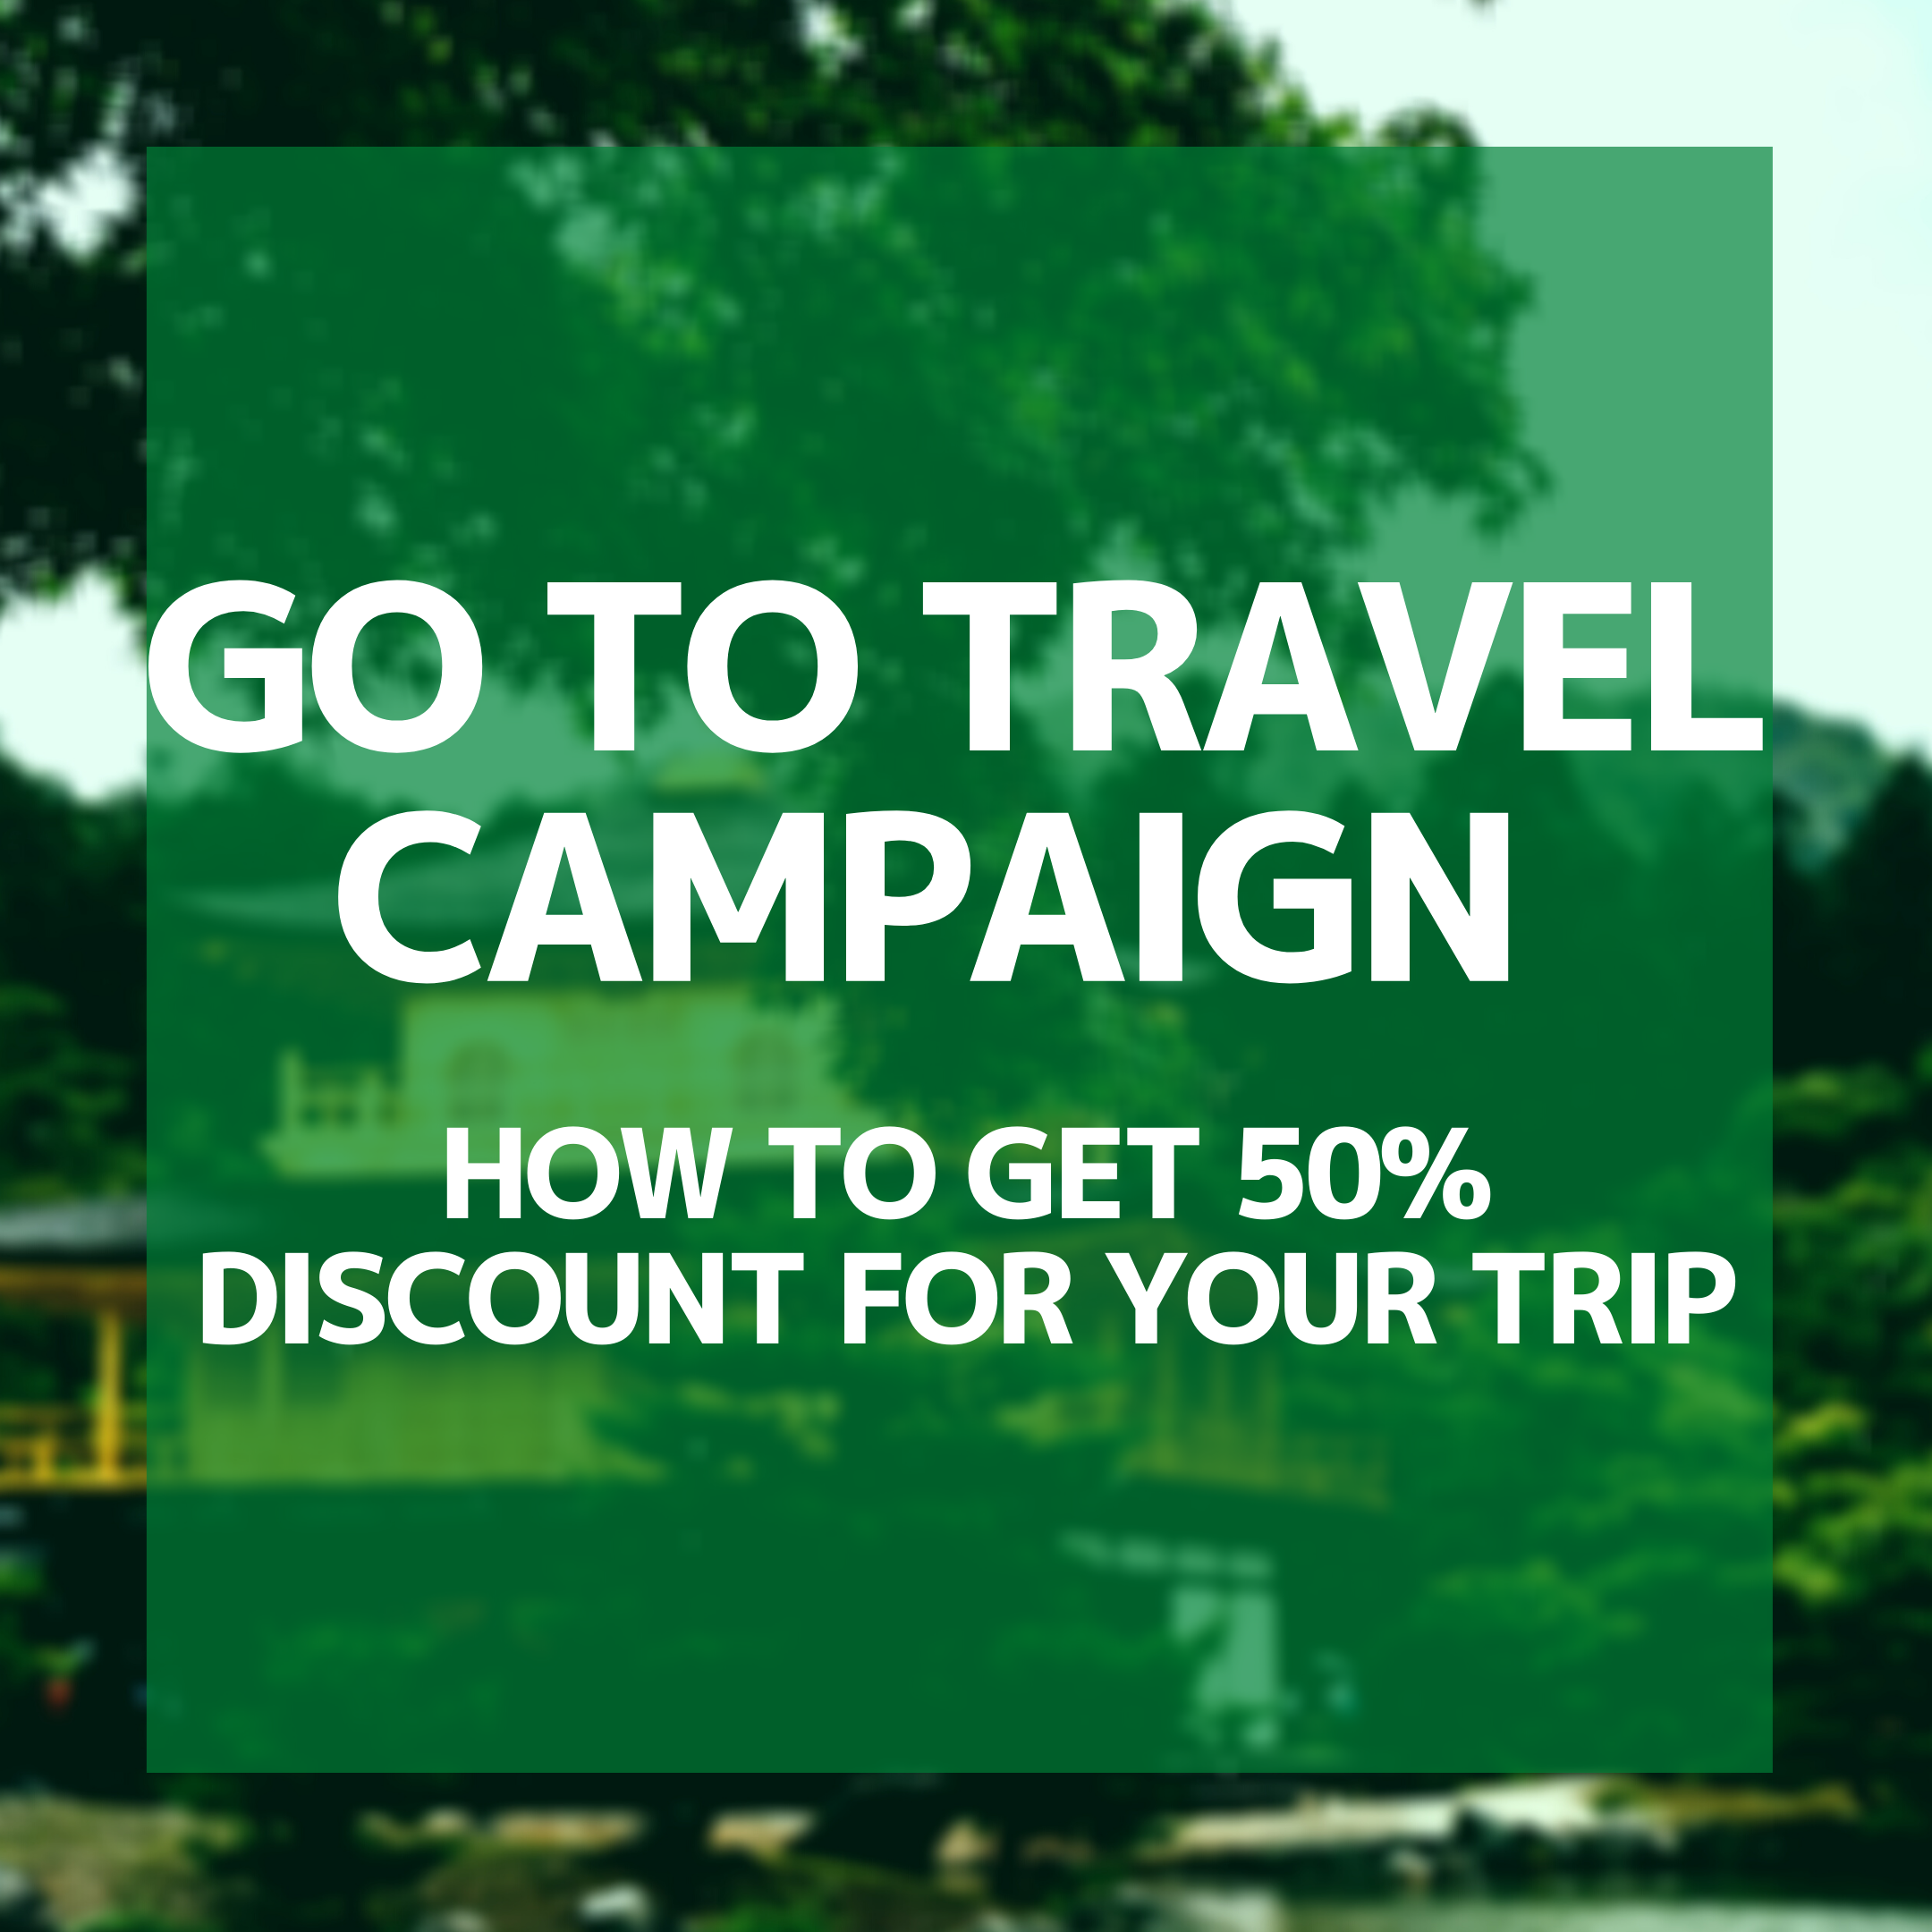 Go to travel campaign